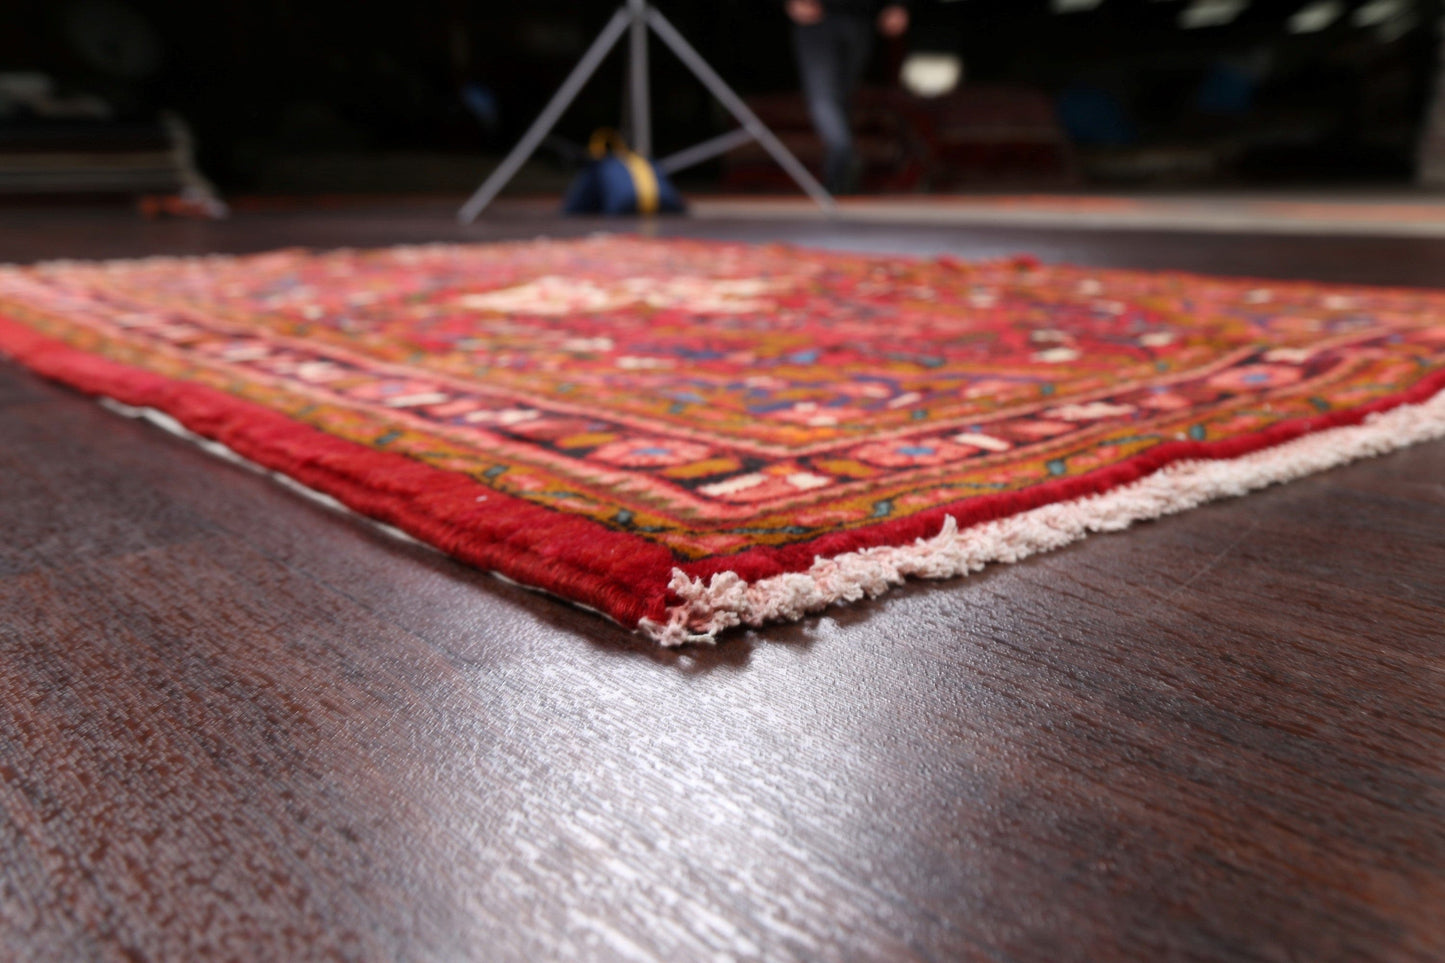 Floral Red Lilian Persian Area Rug 4x6